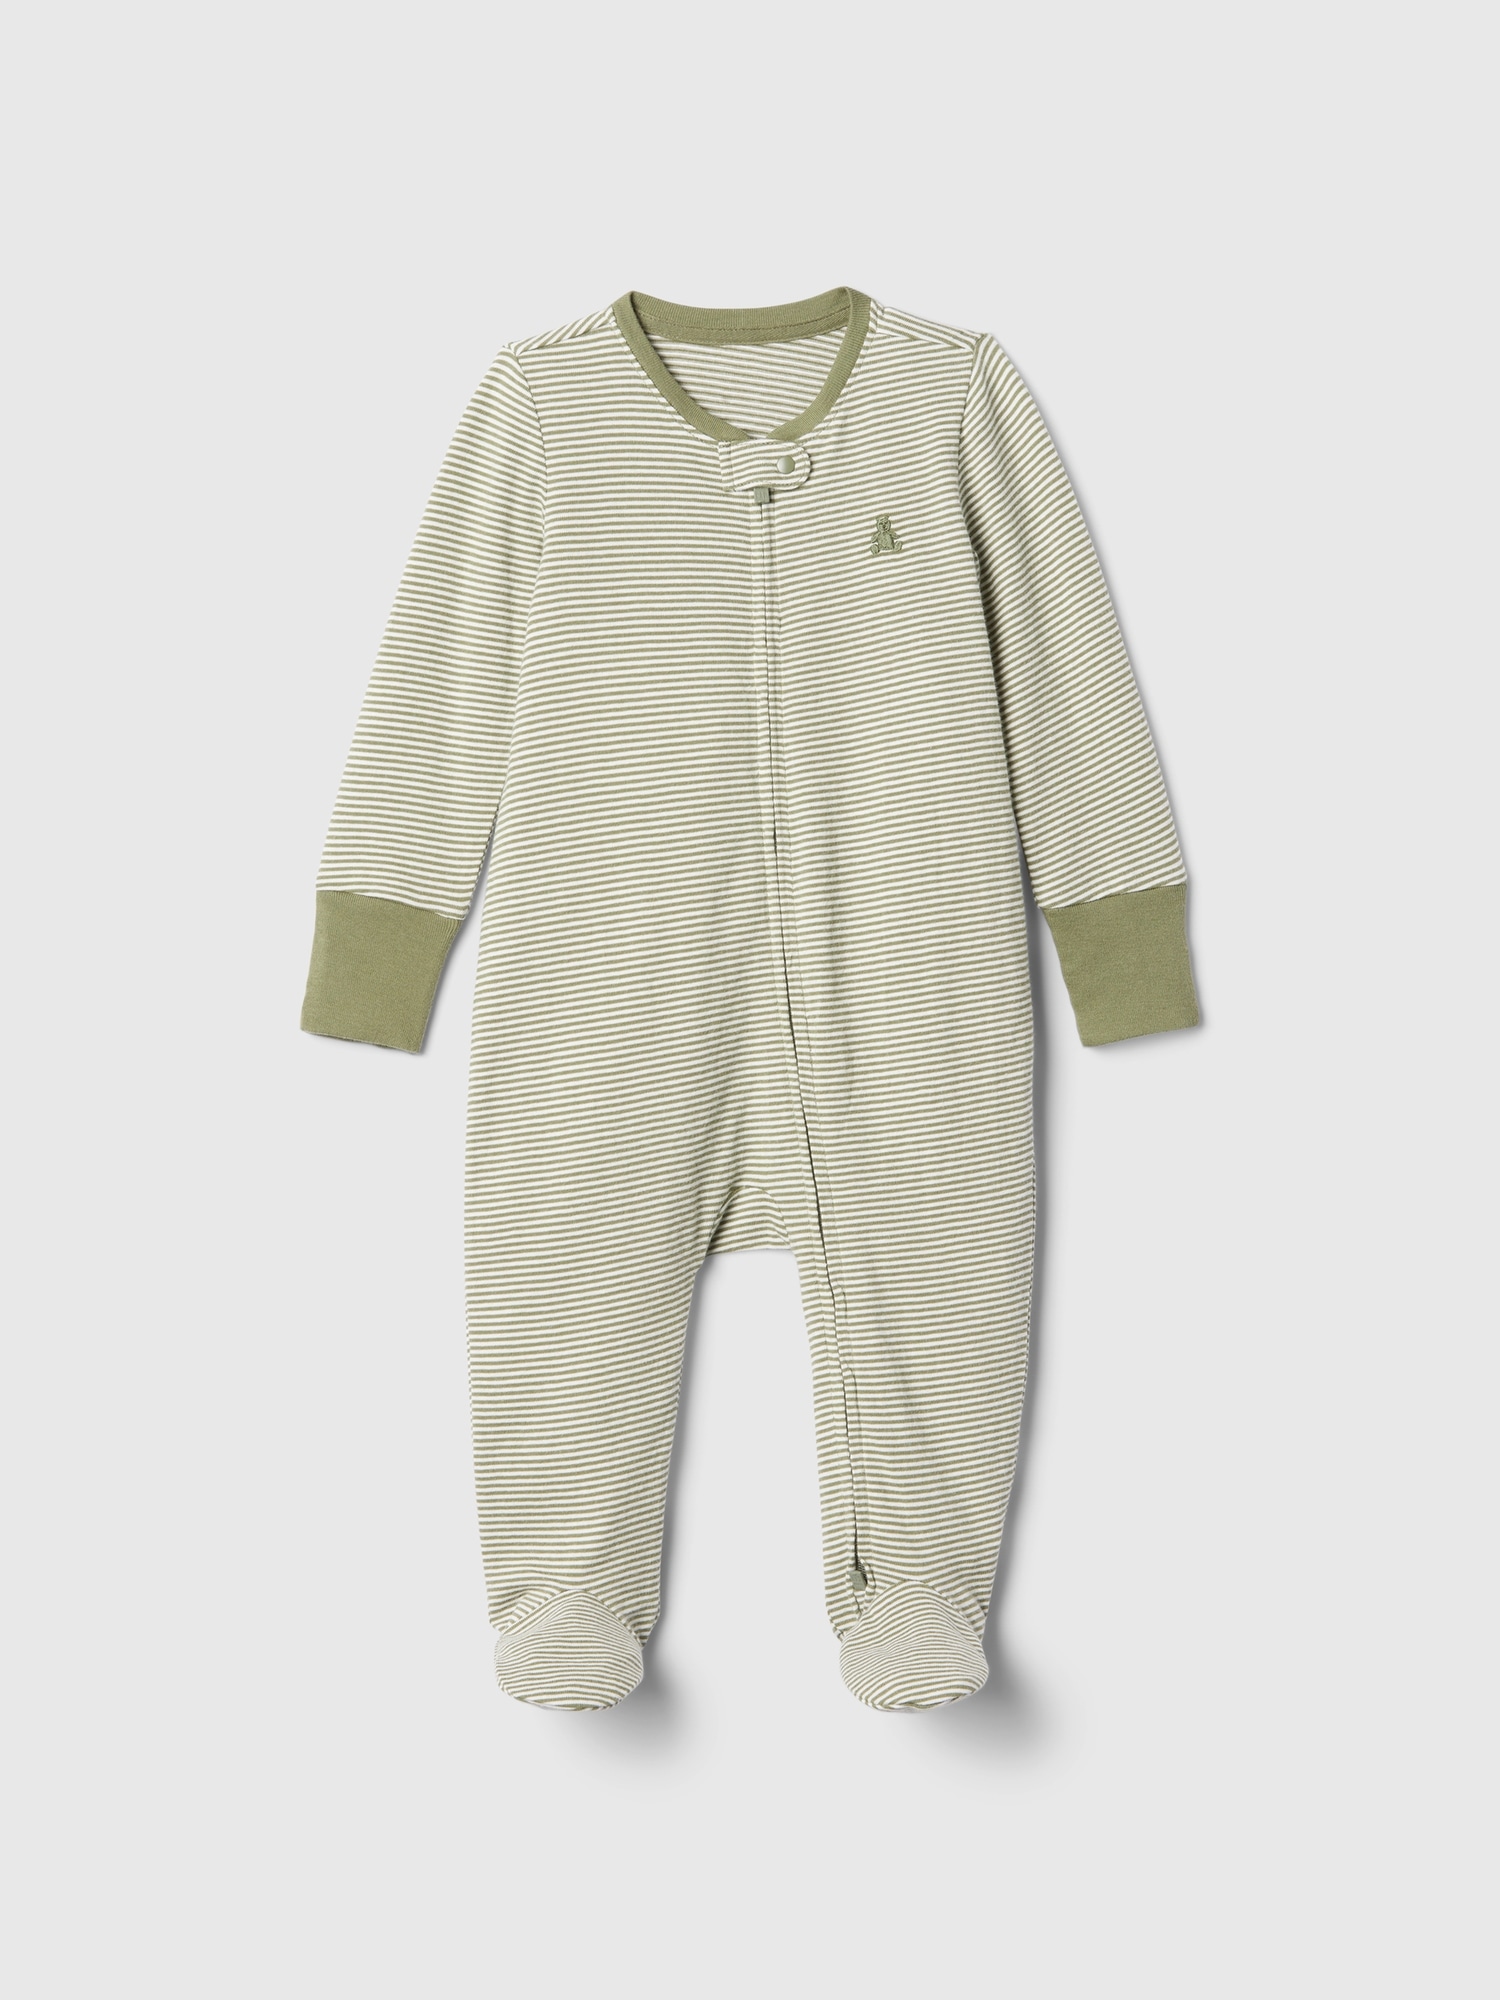 Baby First Favorites Organic Cotton Footed One-Piece